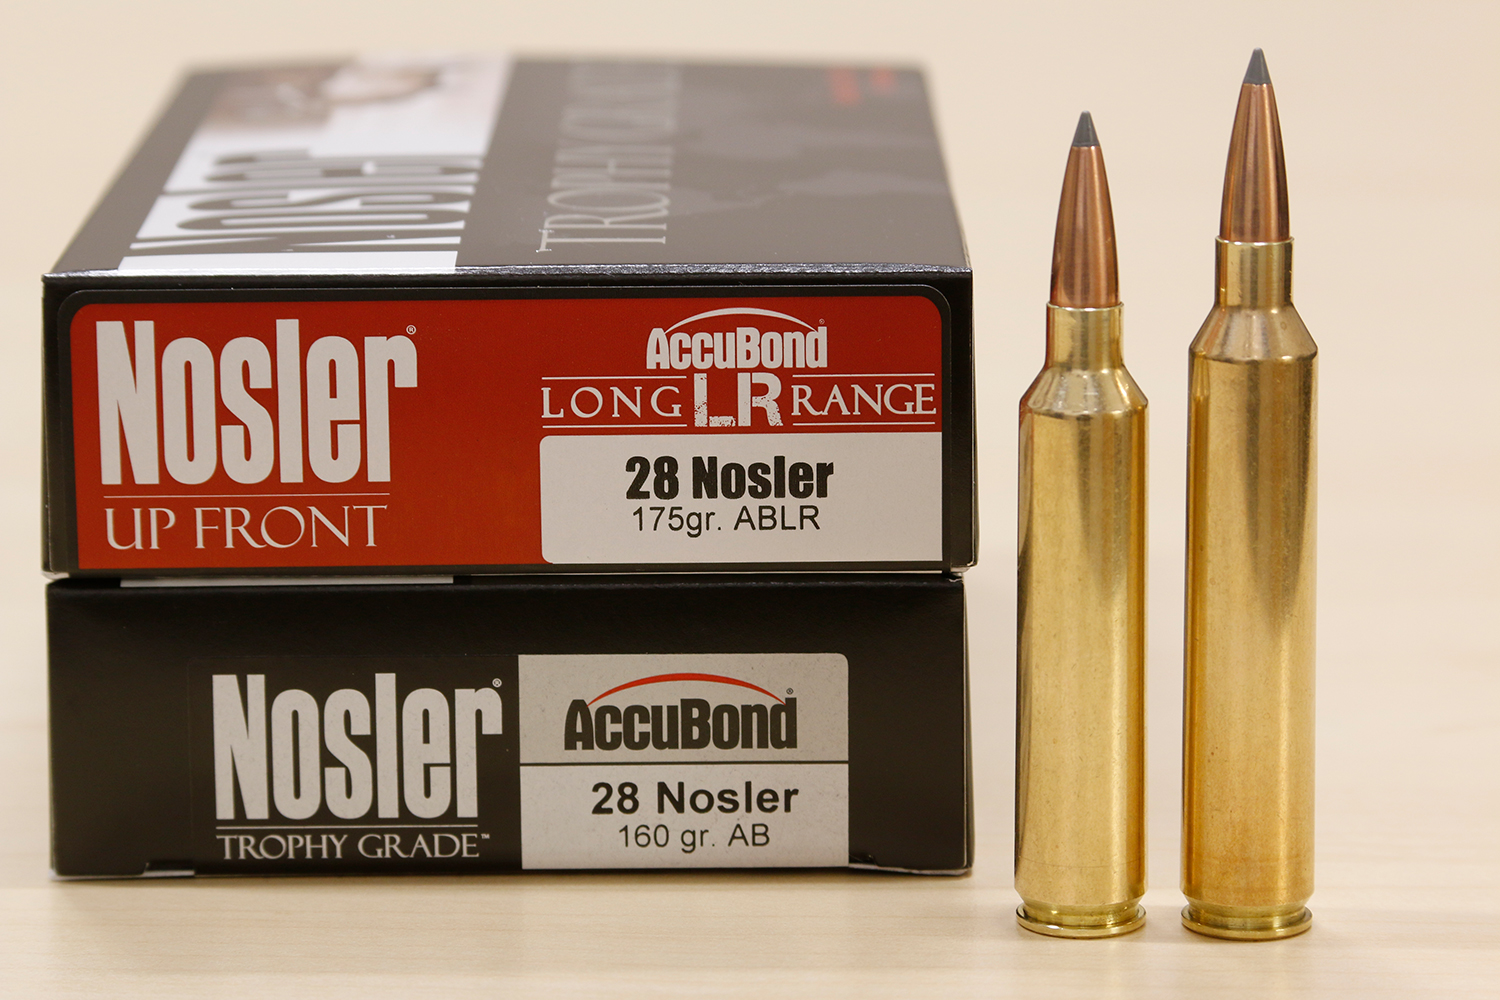 A box of Nosler rifle ammuniton on a table two ammo cartridges standing beside it.